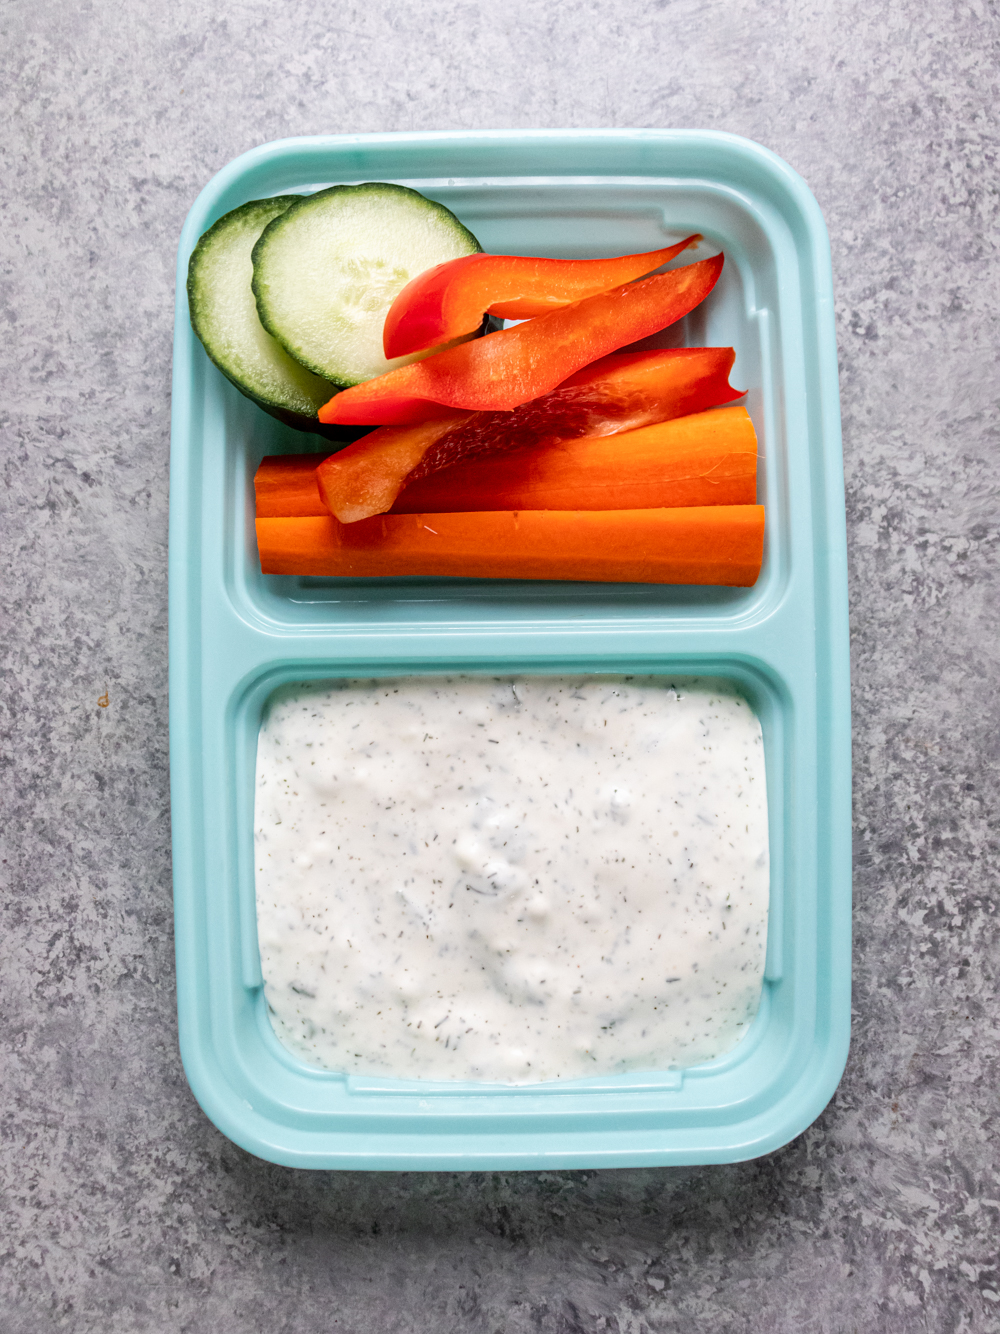 Keto ranch dressing and veggies in a meal prep container